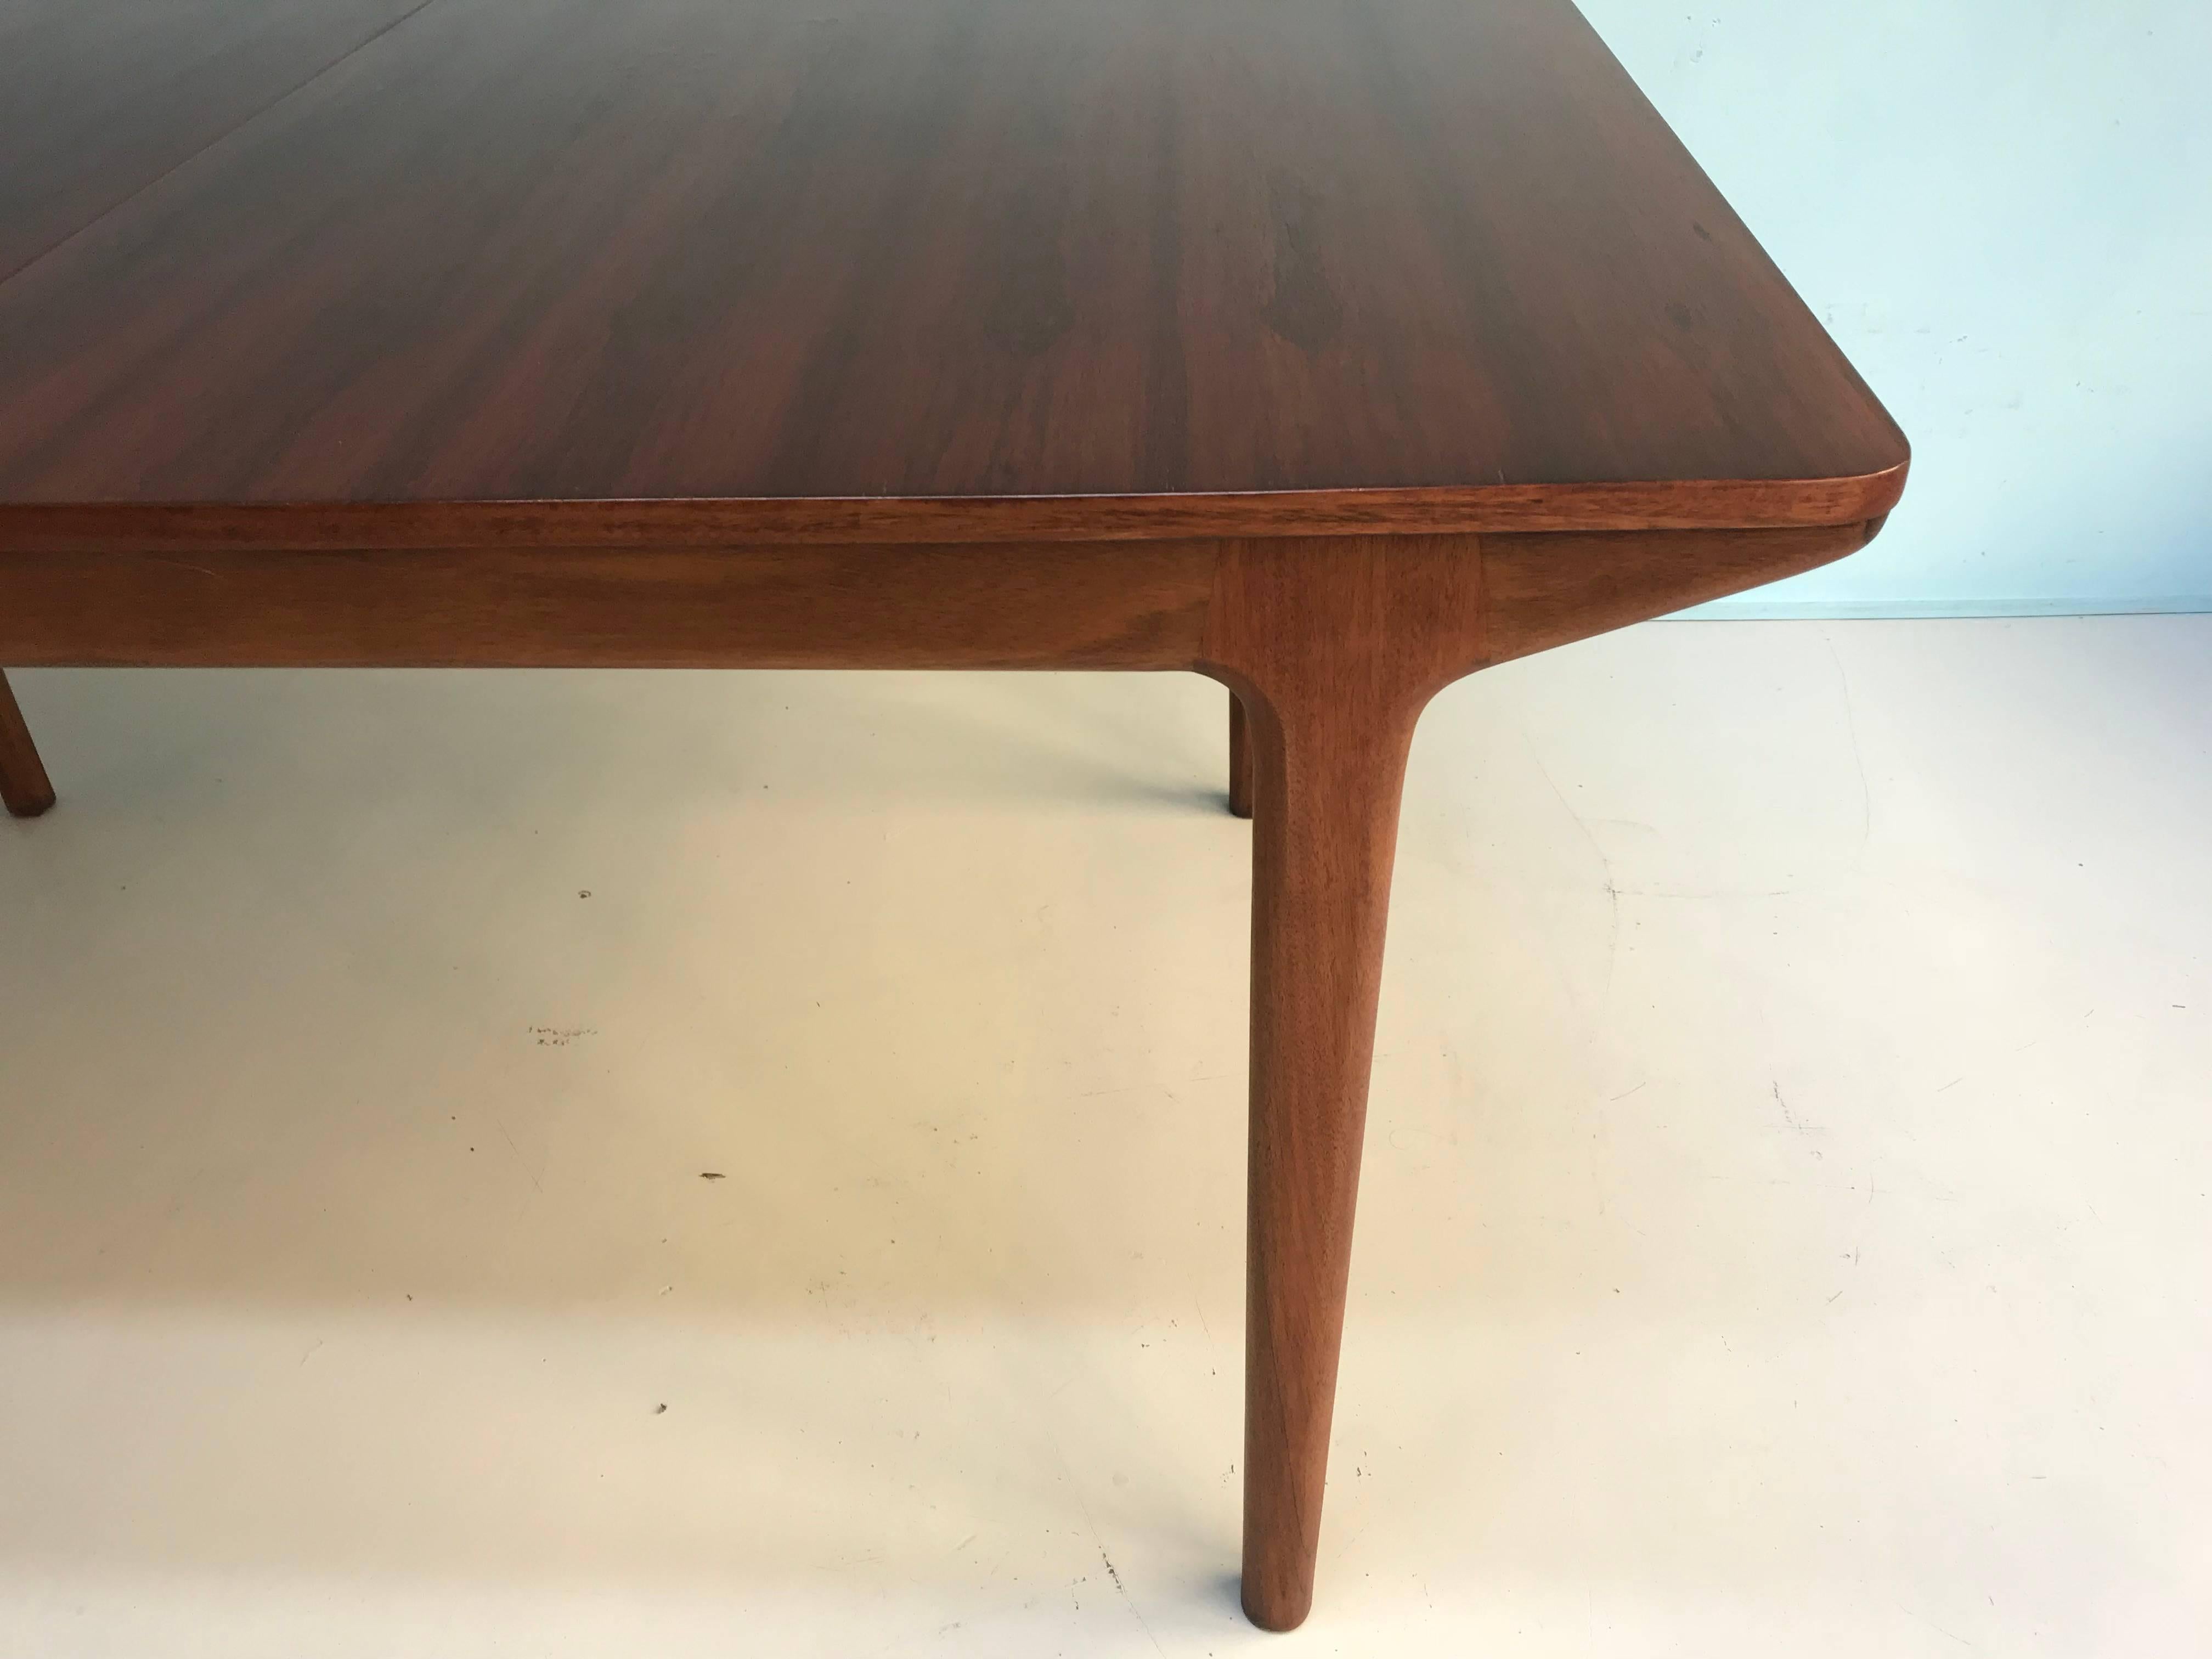 MacIntosh dining table made of rosewood in a good condition.
Very genius system to make the table longer in two steps.
Condition: very good
Measurements:
Normal:
159 cm W/91 cm D/74 cm H
1 step :
197 cm W/91 D/74 H
2 step:
235 cm W/91 cm